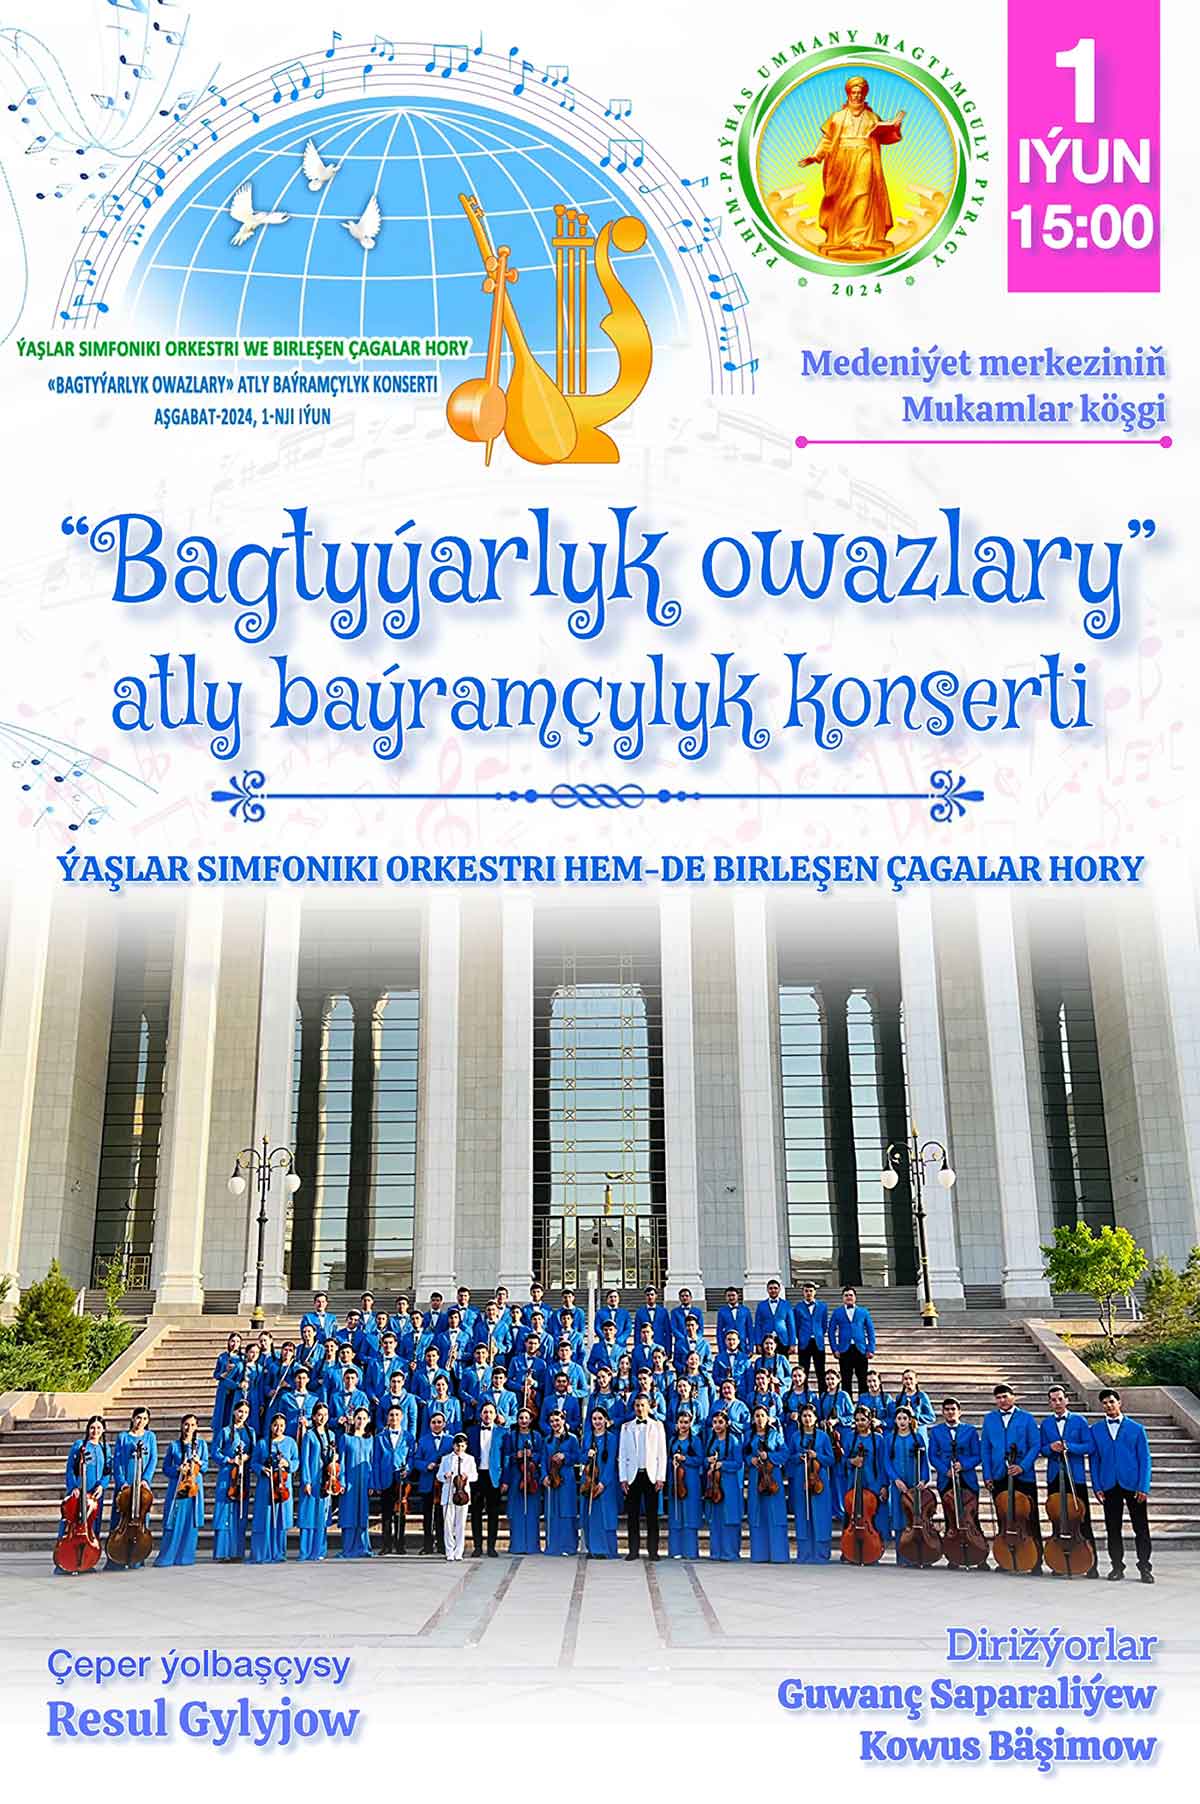 Concert of the Youth Symphony Orchestra and children's choir to be held